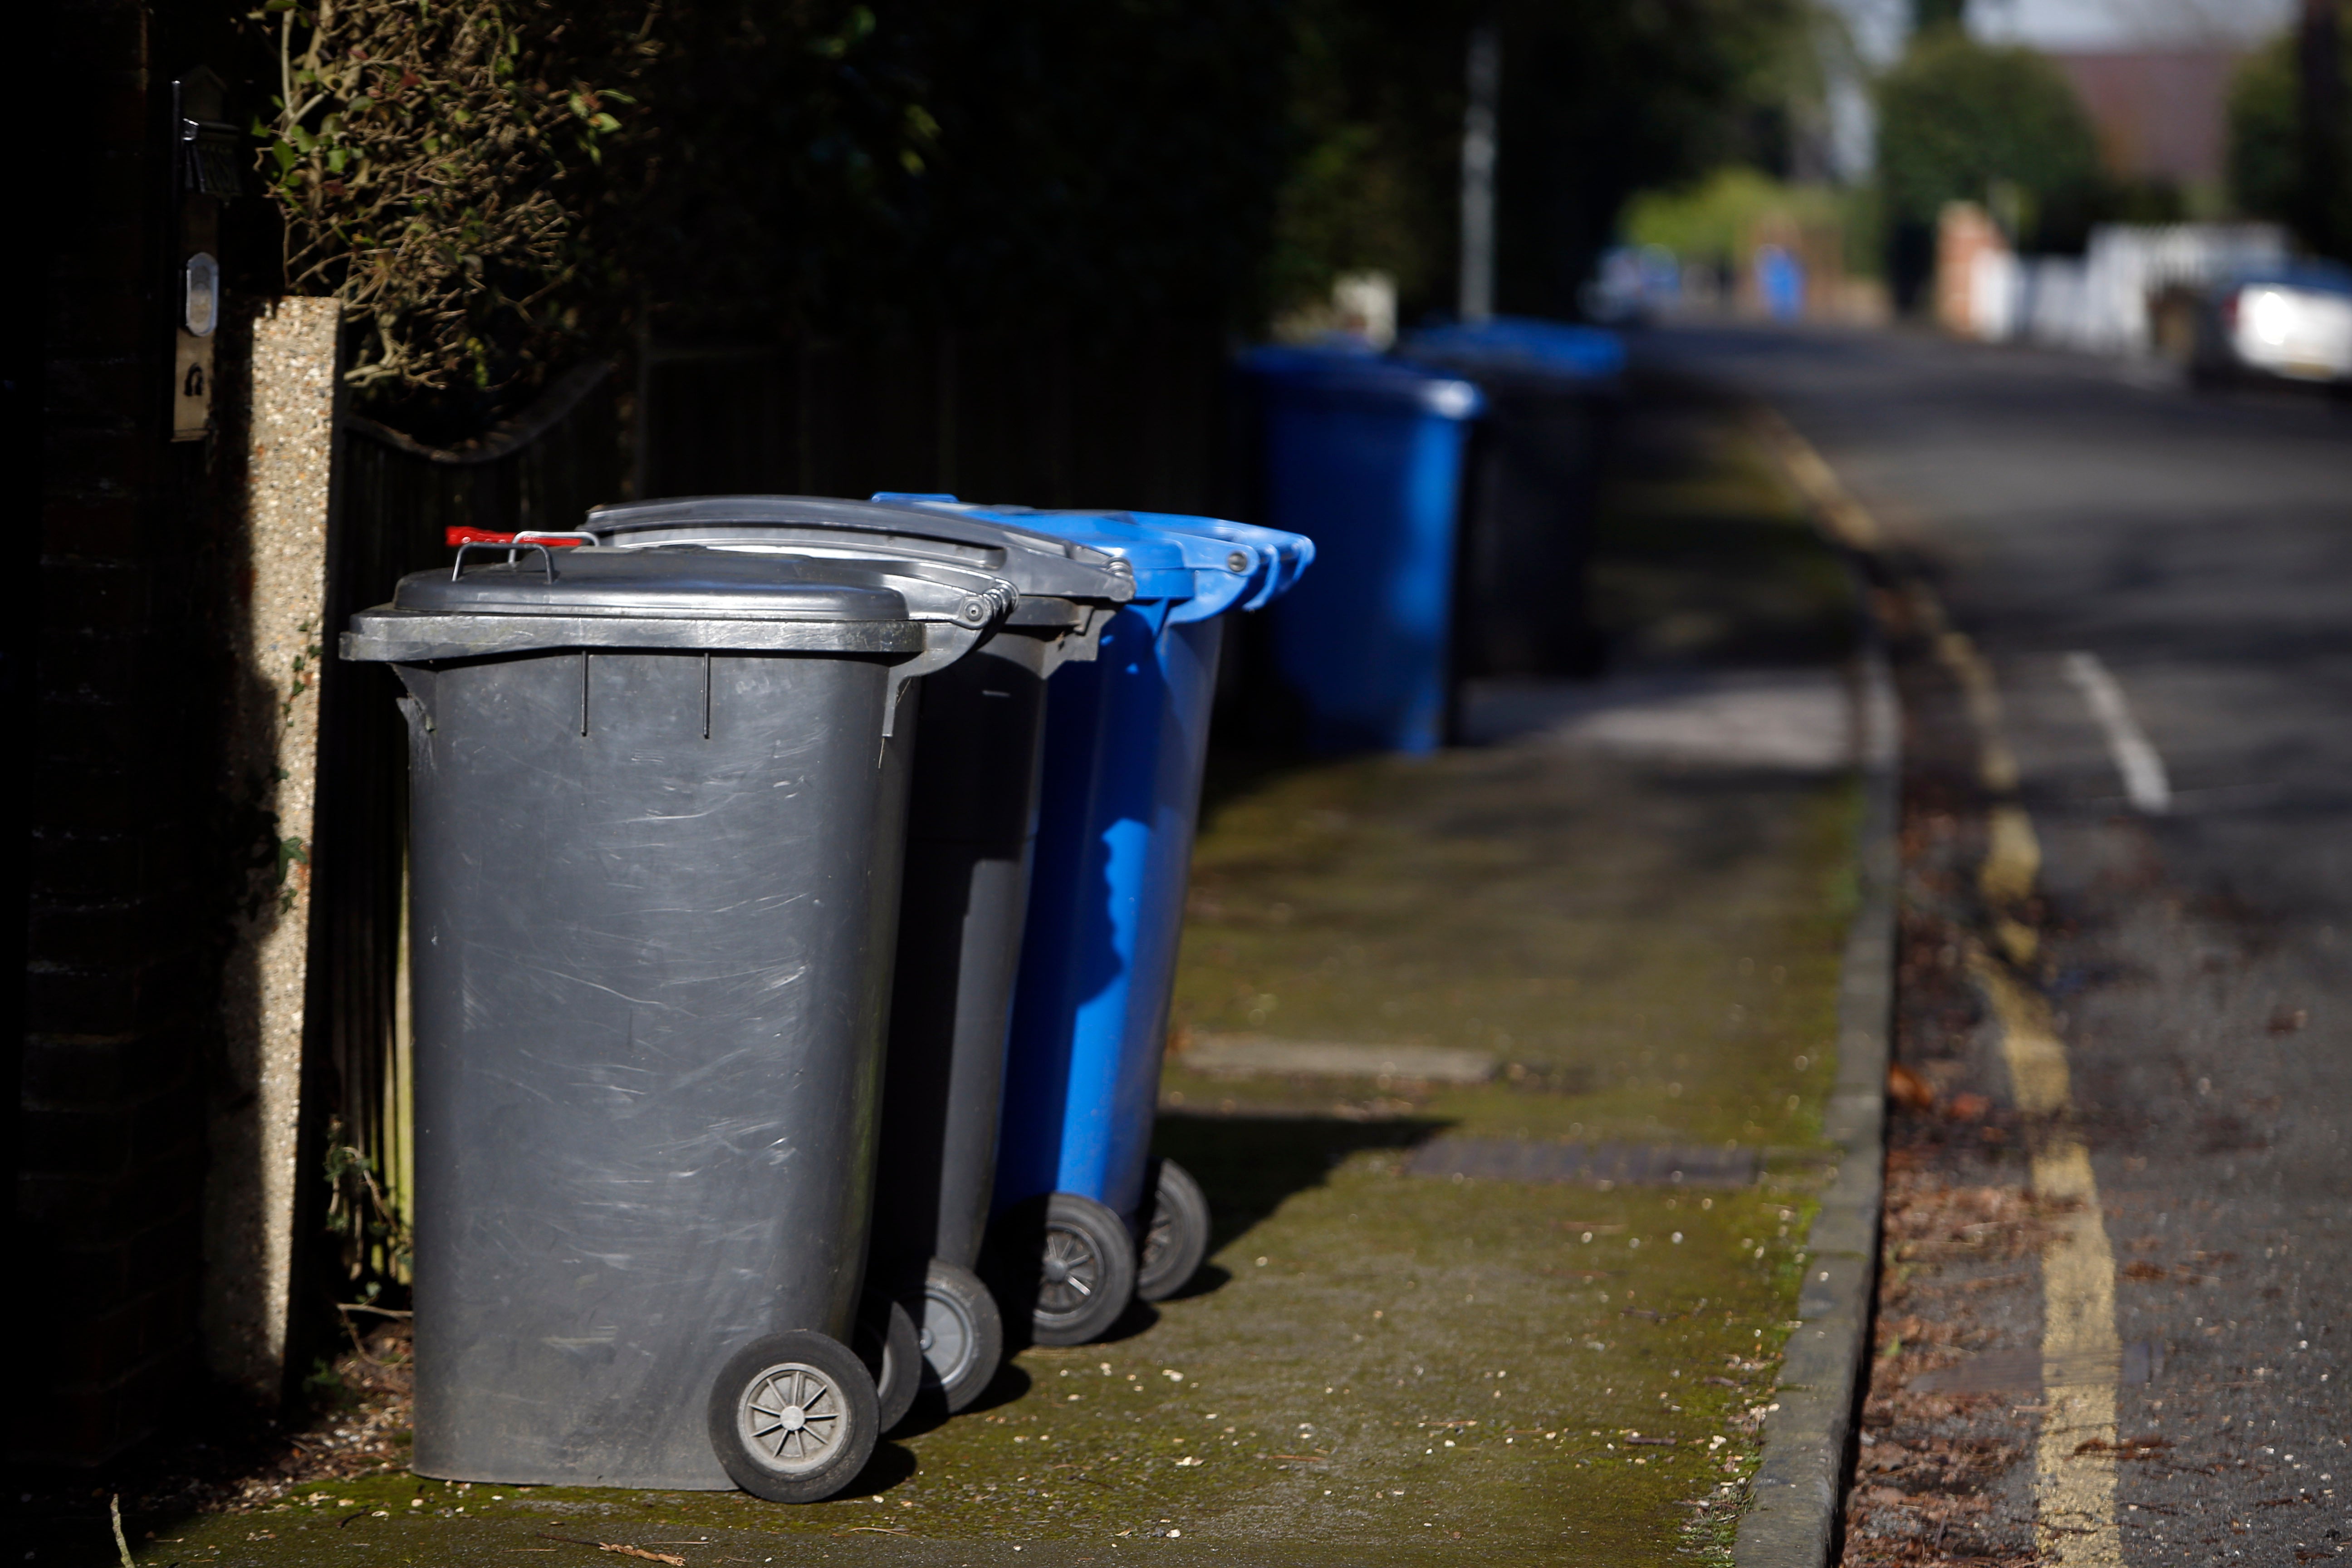 Waste collection has been hit by staff shortages due to Covid isolation